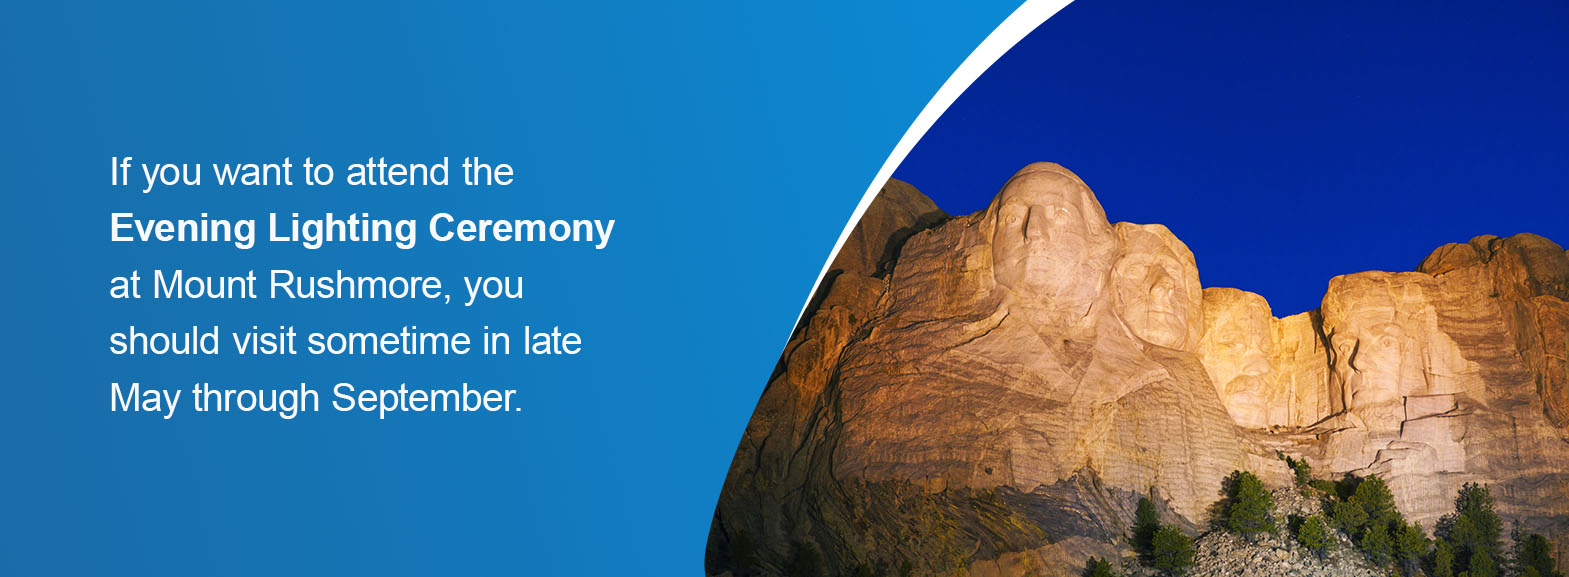 Choosing What Time of Year to Visit - If you want to attend the Evening Lighting Ceremony at Mount Rushmore, you should visit sometime in late May through September.